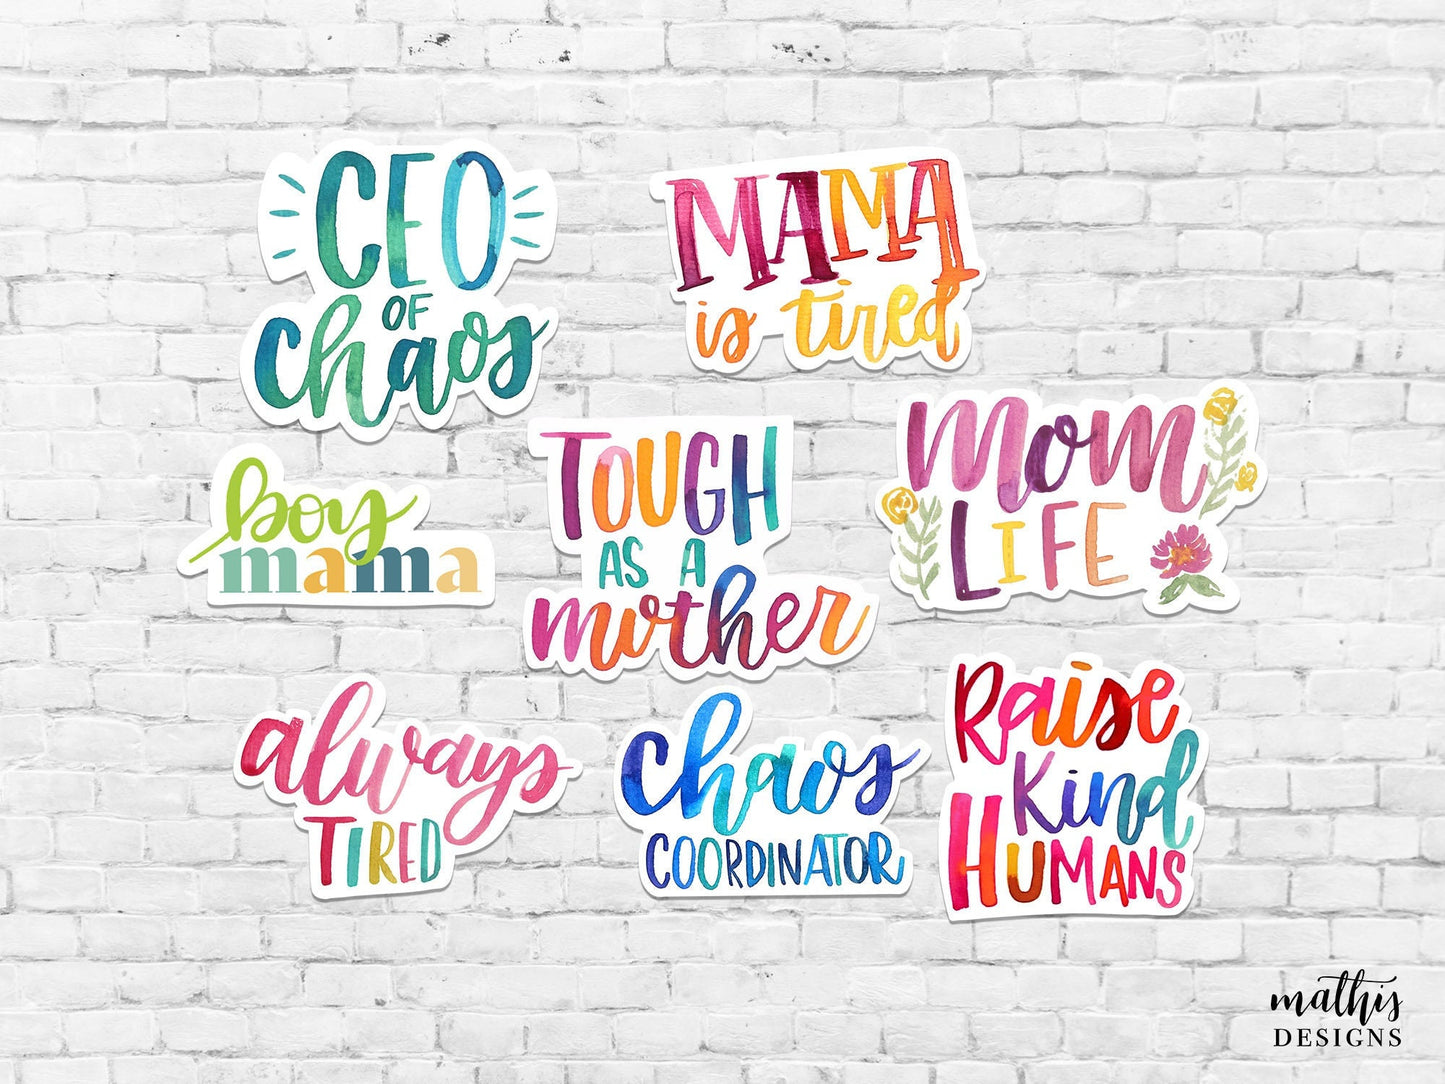 Mom Life Stickers, Sticker Set of 8, Stickers for Moms, Motherhood Stickers, Parenting Decals, Gift